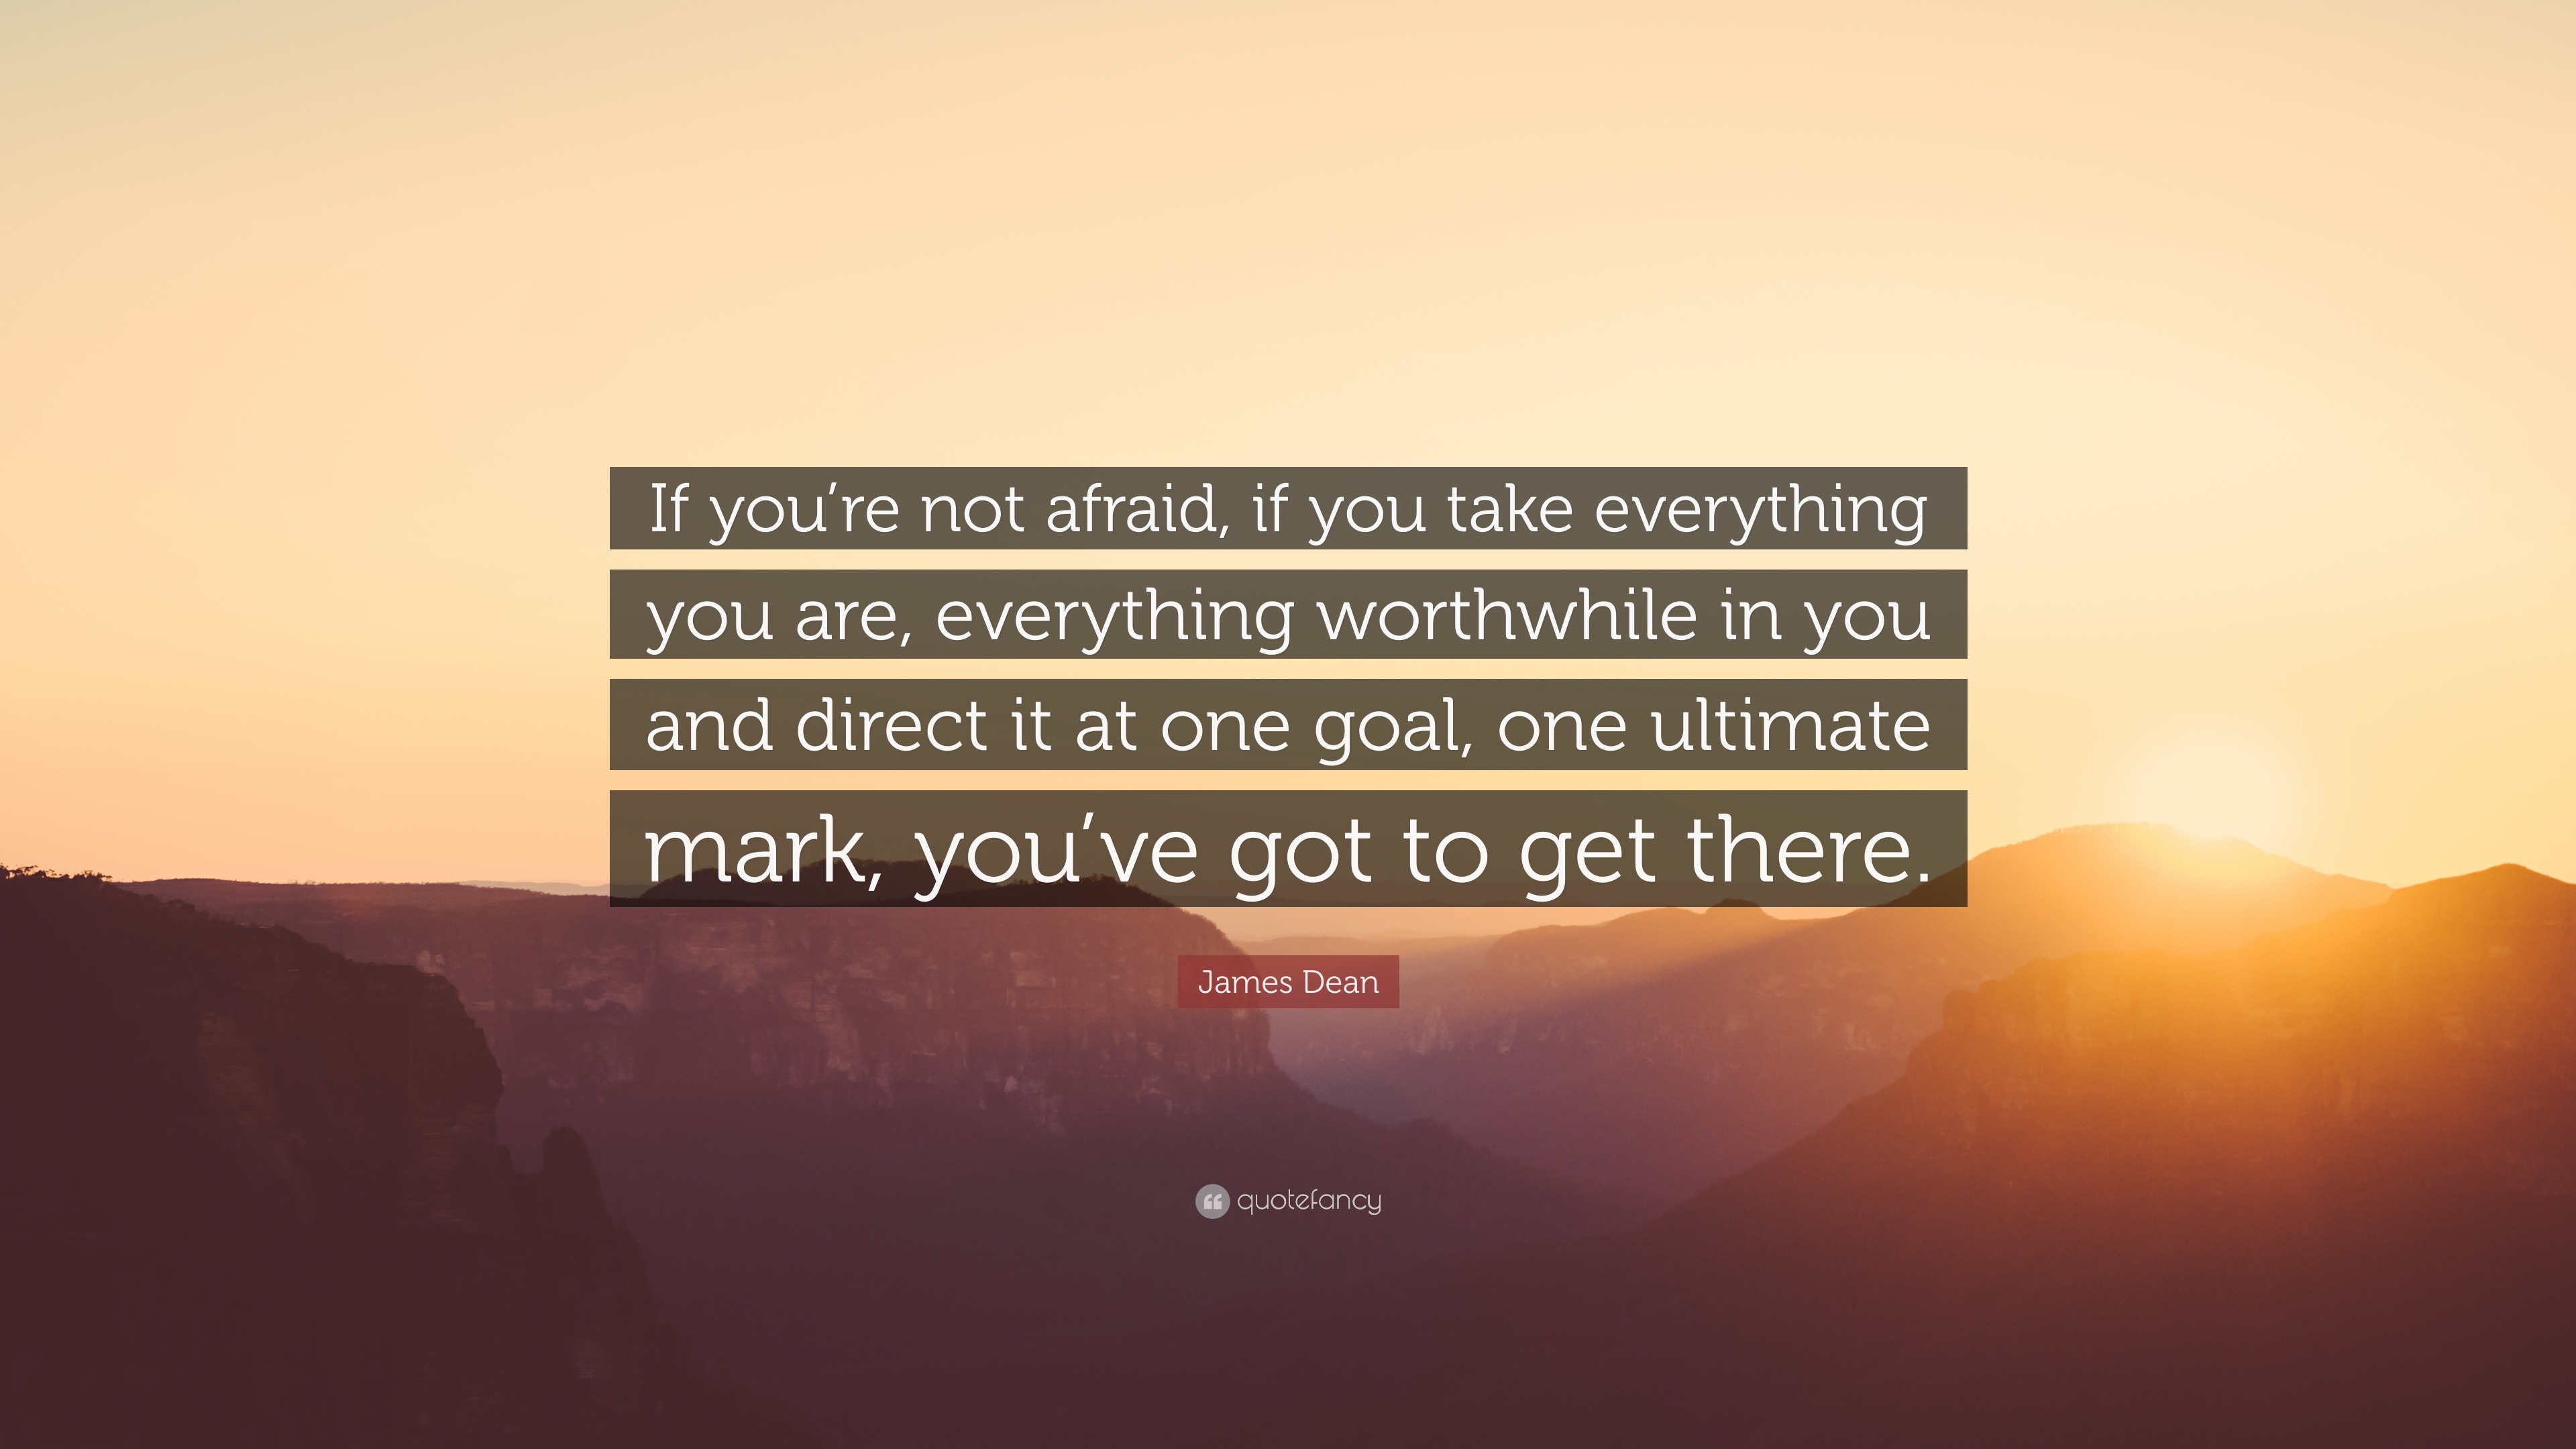 James Dean Quote If You Re Not Afraid If You Take Everything You Are Everything Worthwhile In You And Direct It At One Goal One Ultima